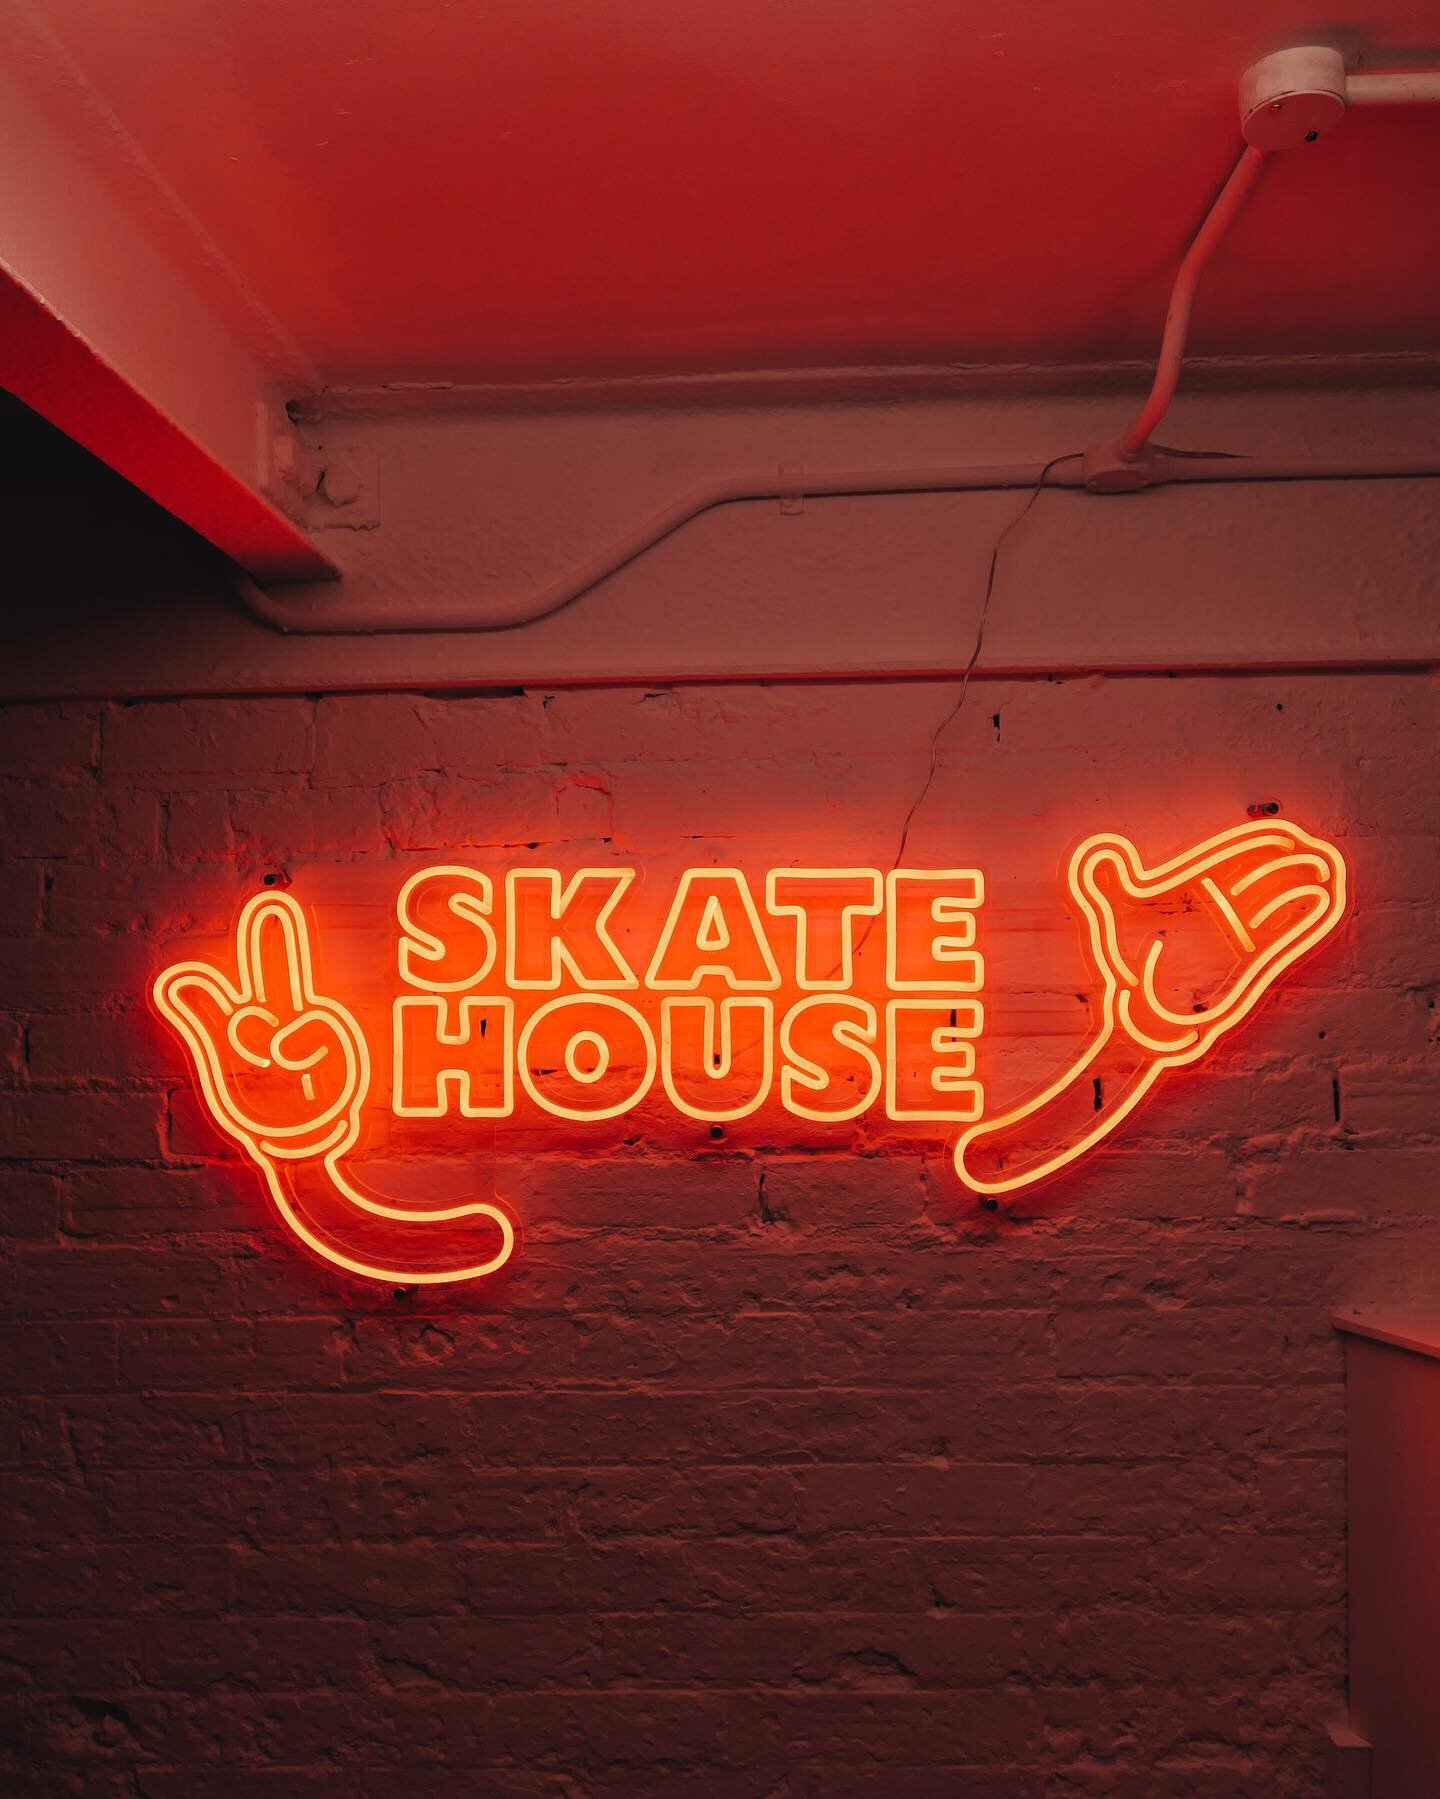 Branding by DESK for the The Skate House at Coast, opening soon_

#theskatehouseatcoast 
#branding 
#brandidentity 
#brand 
#logo 
#graphicdesign 
#typography 
#design 
#designinspiration 
#neon 
#signagedesign 
#bydesk